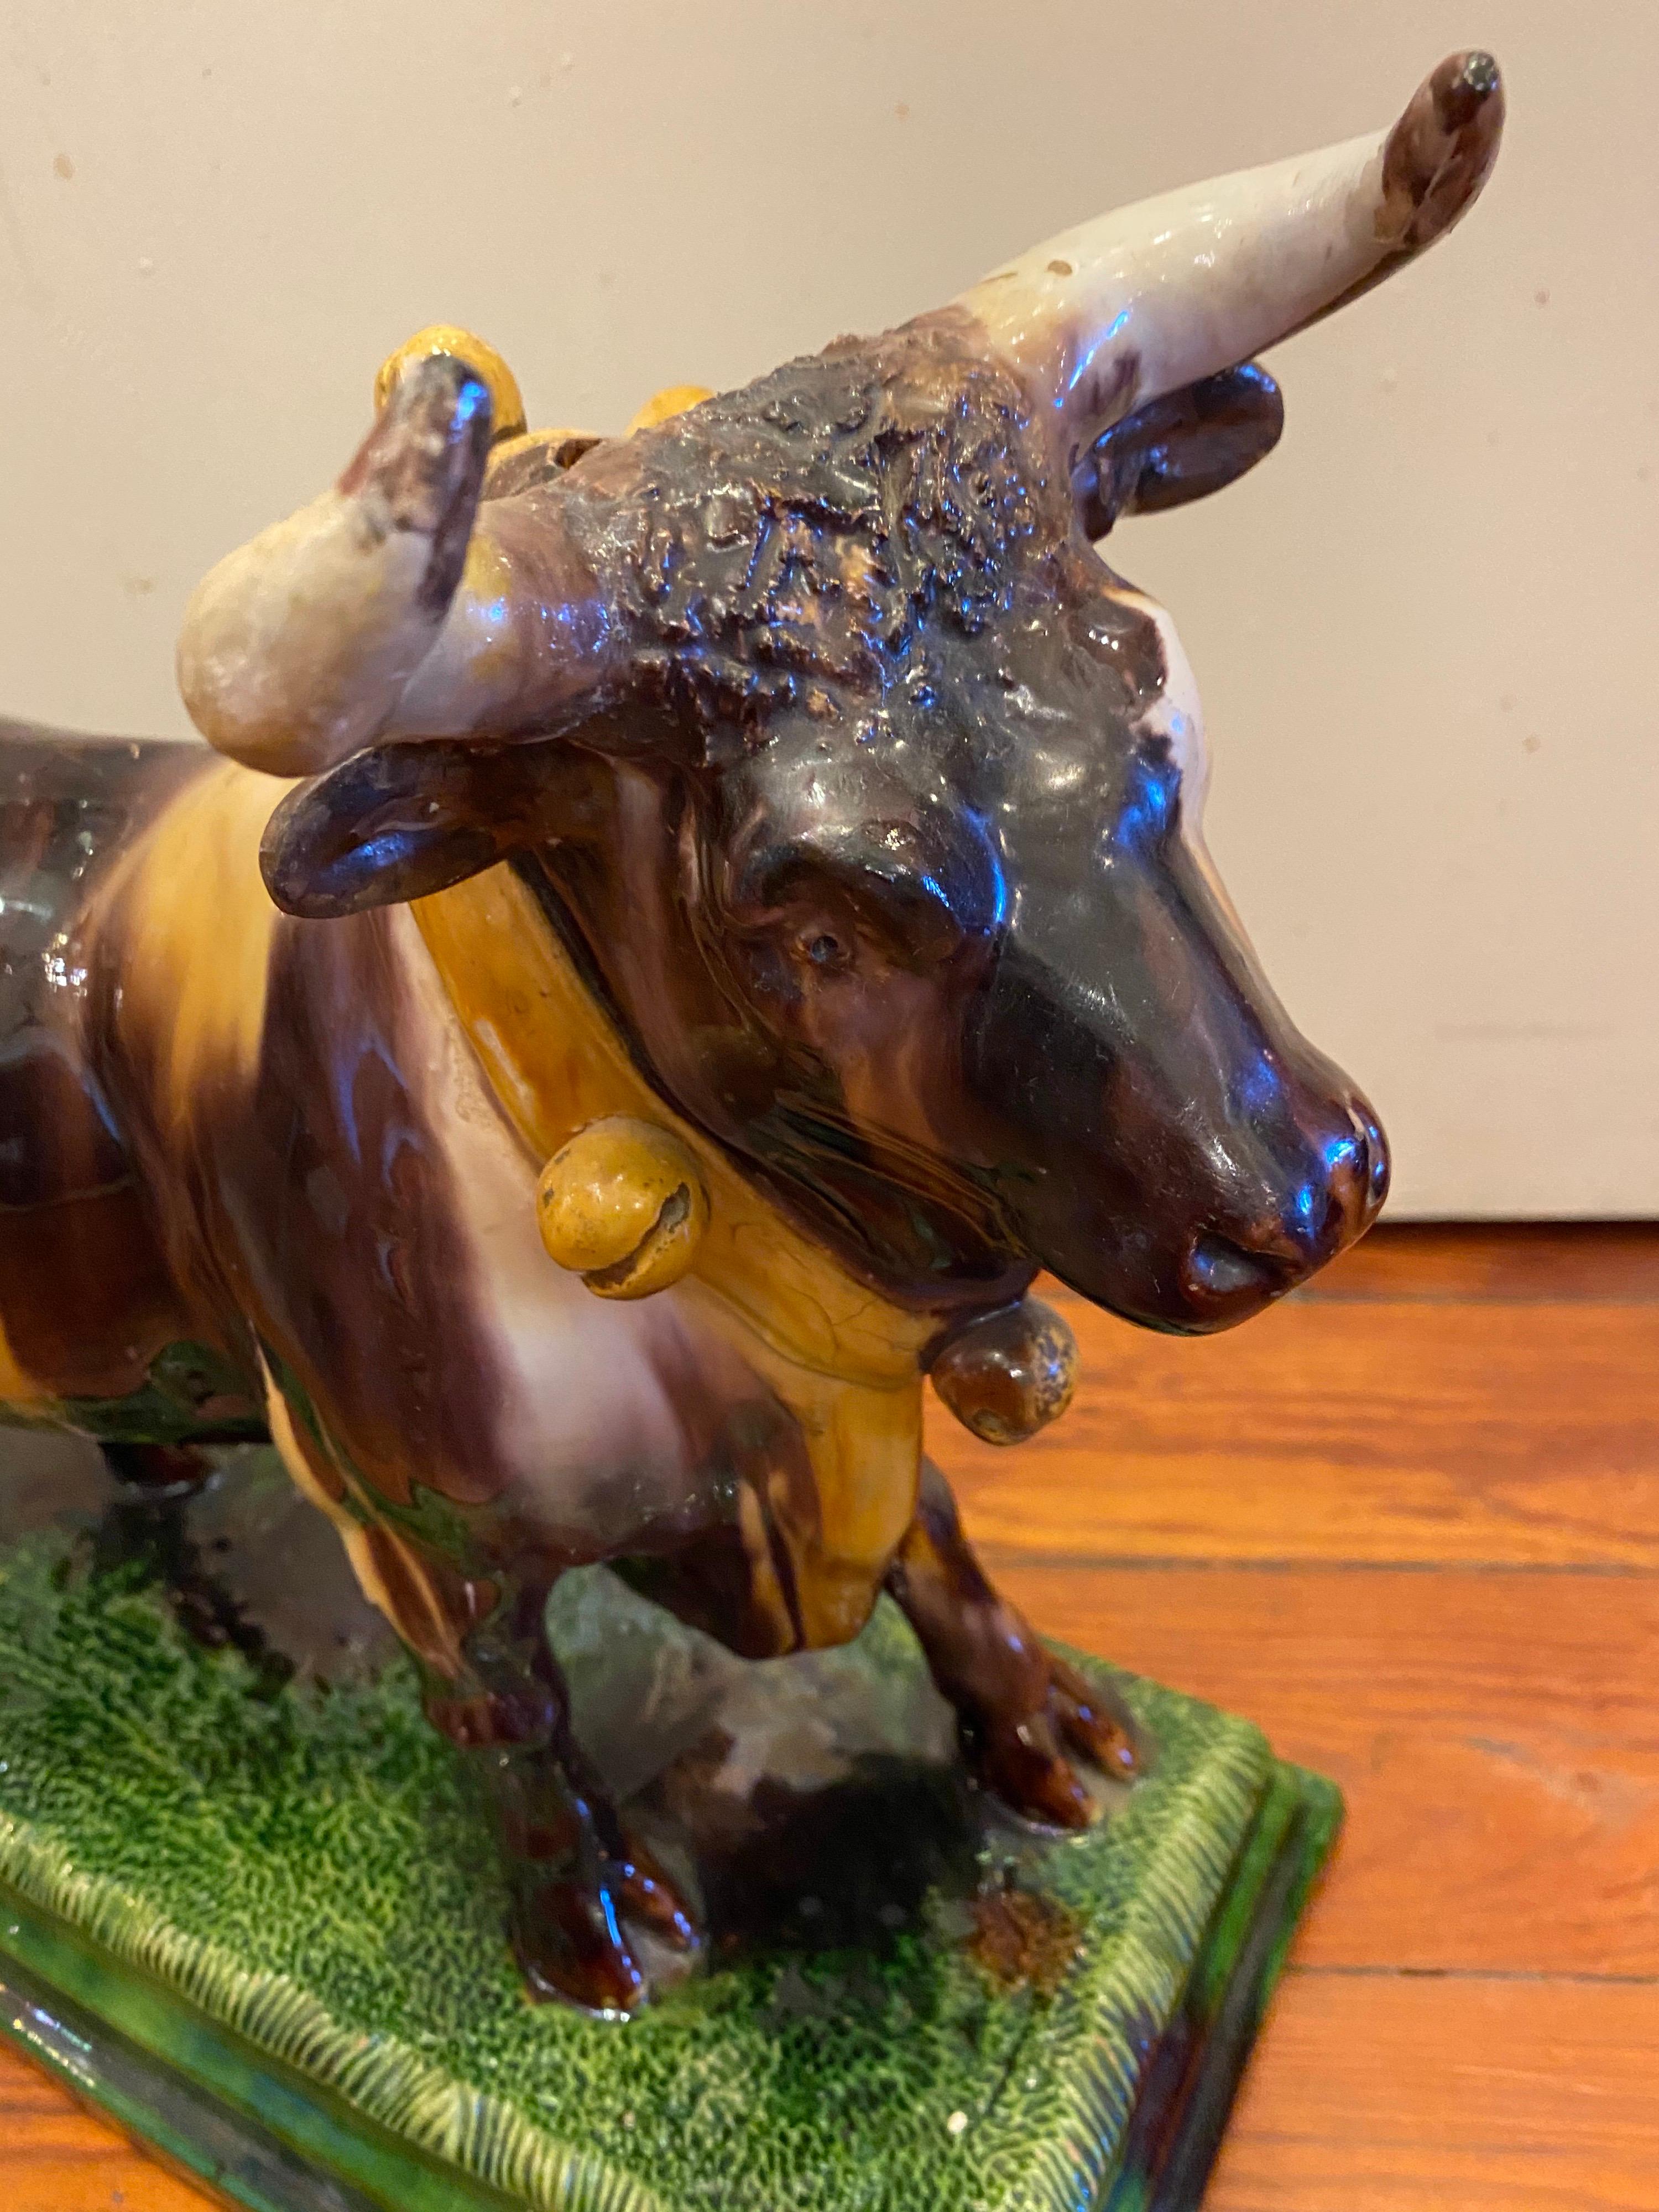 Unusual Portuguese Majolica bull form wine jug with a spout behind the horn on head. Signed F. Gomes d'Avellar 1875-1897.